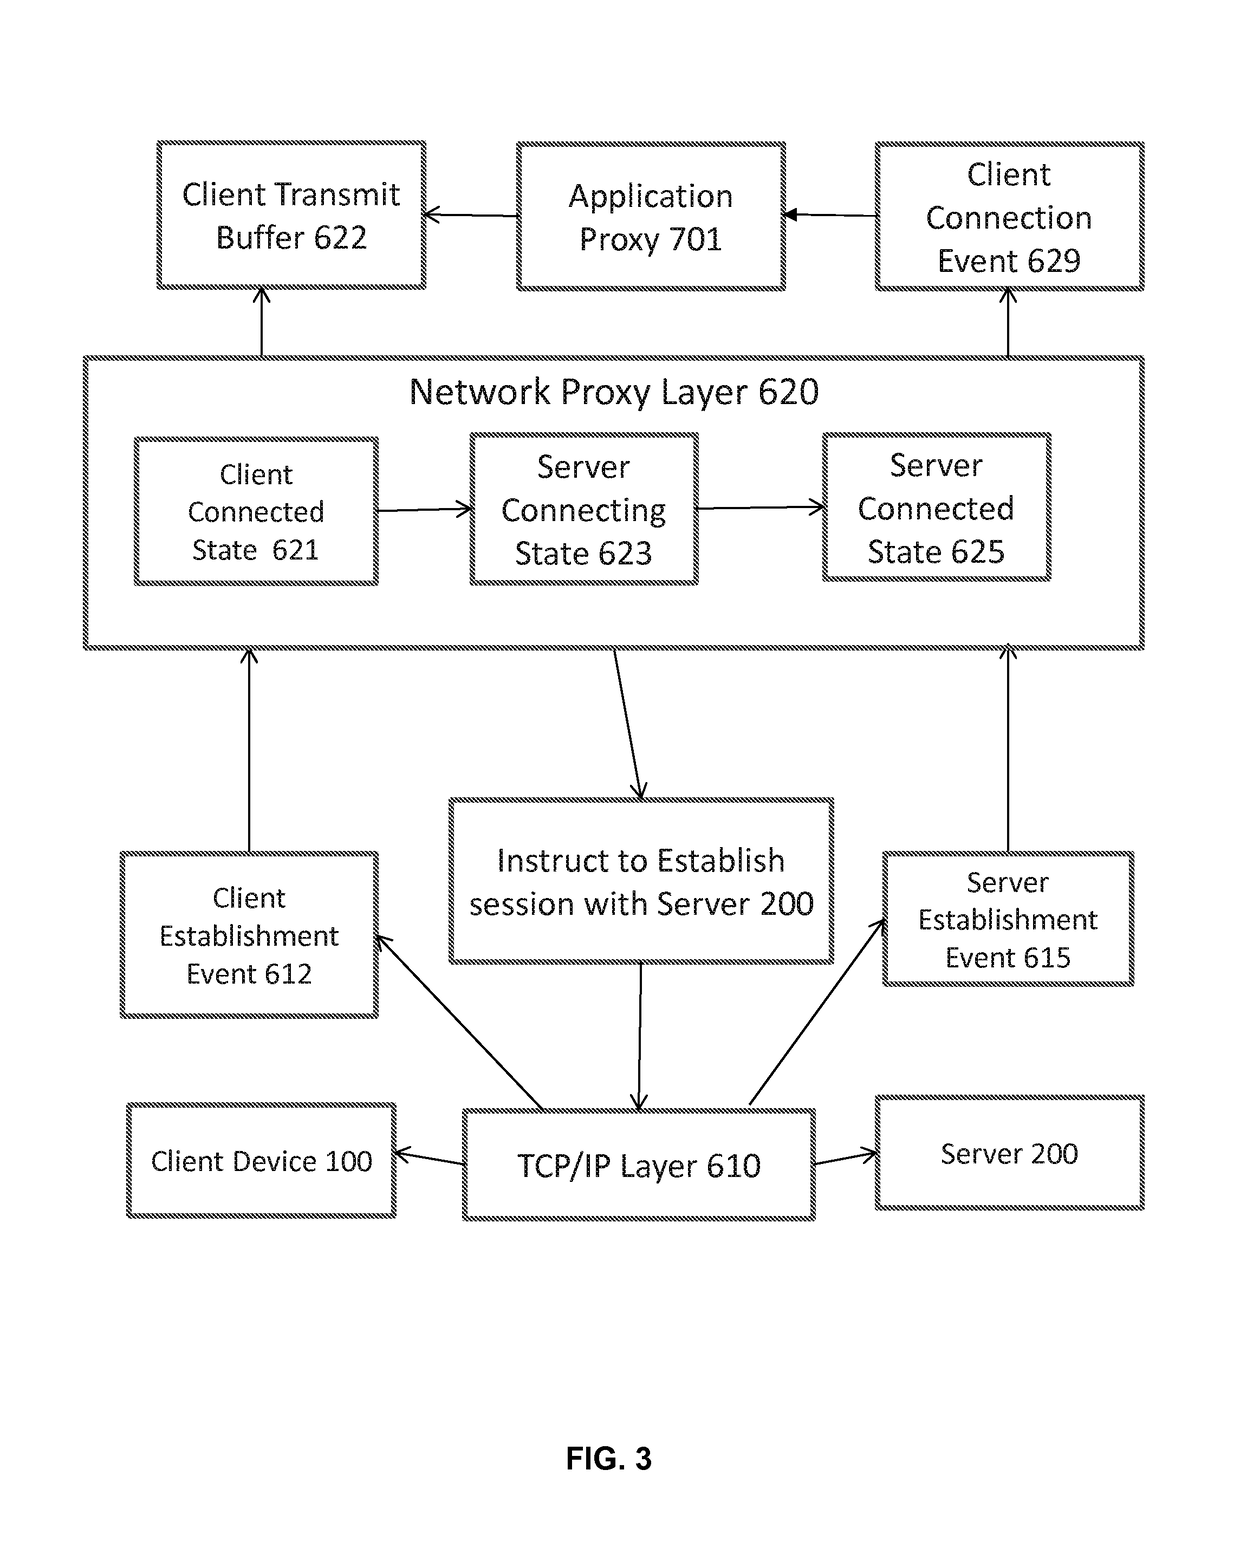 Network proxy layer for policy-based application proxies